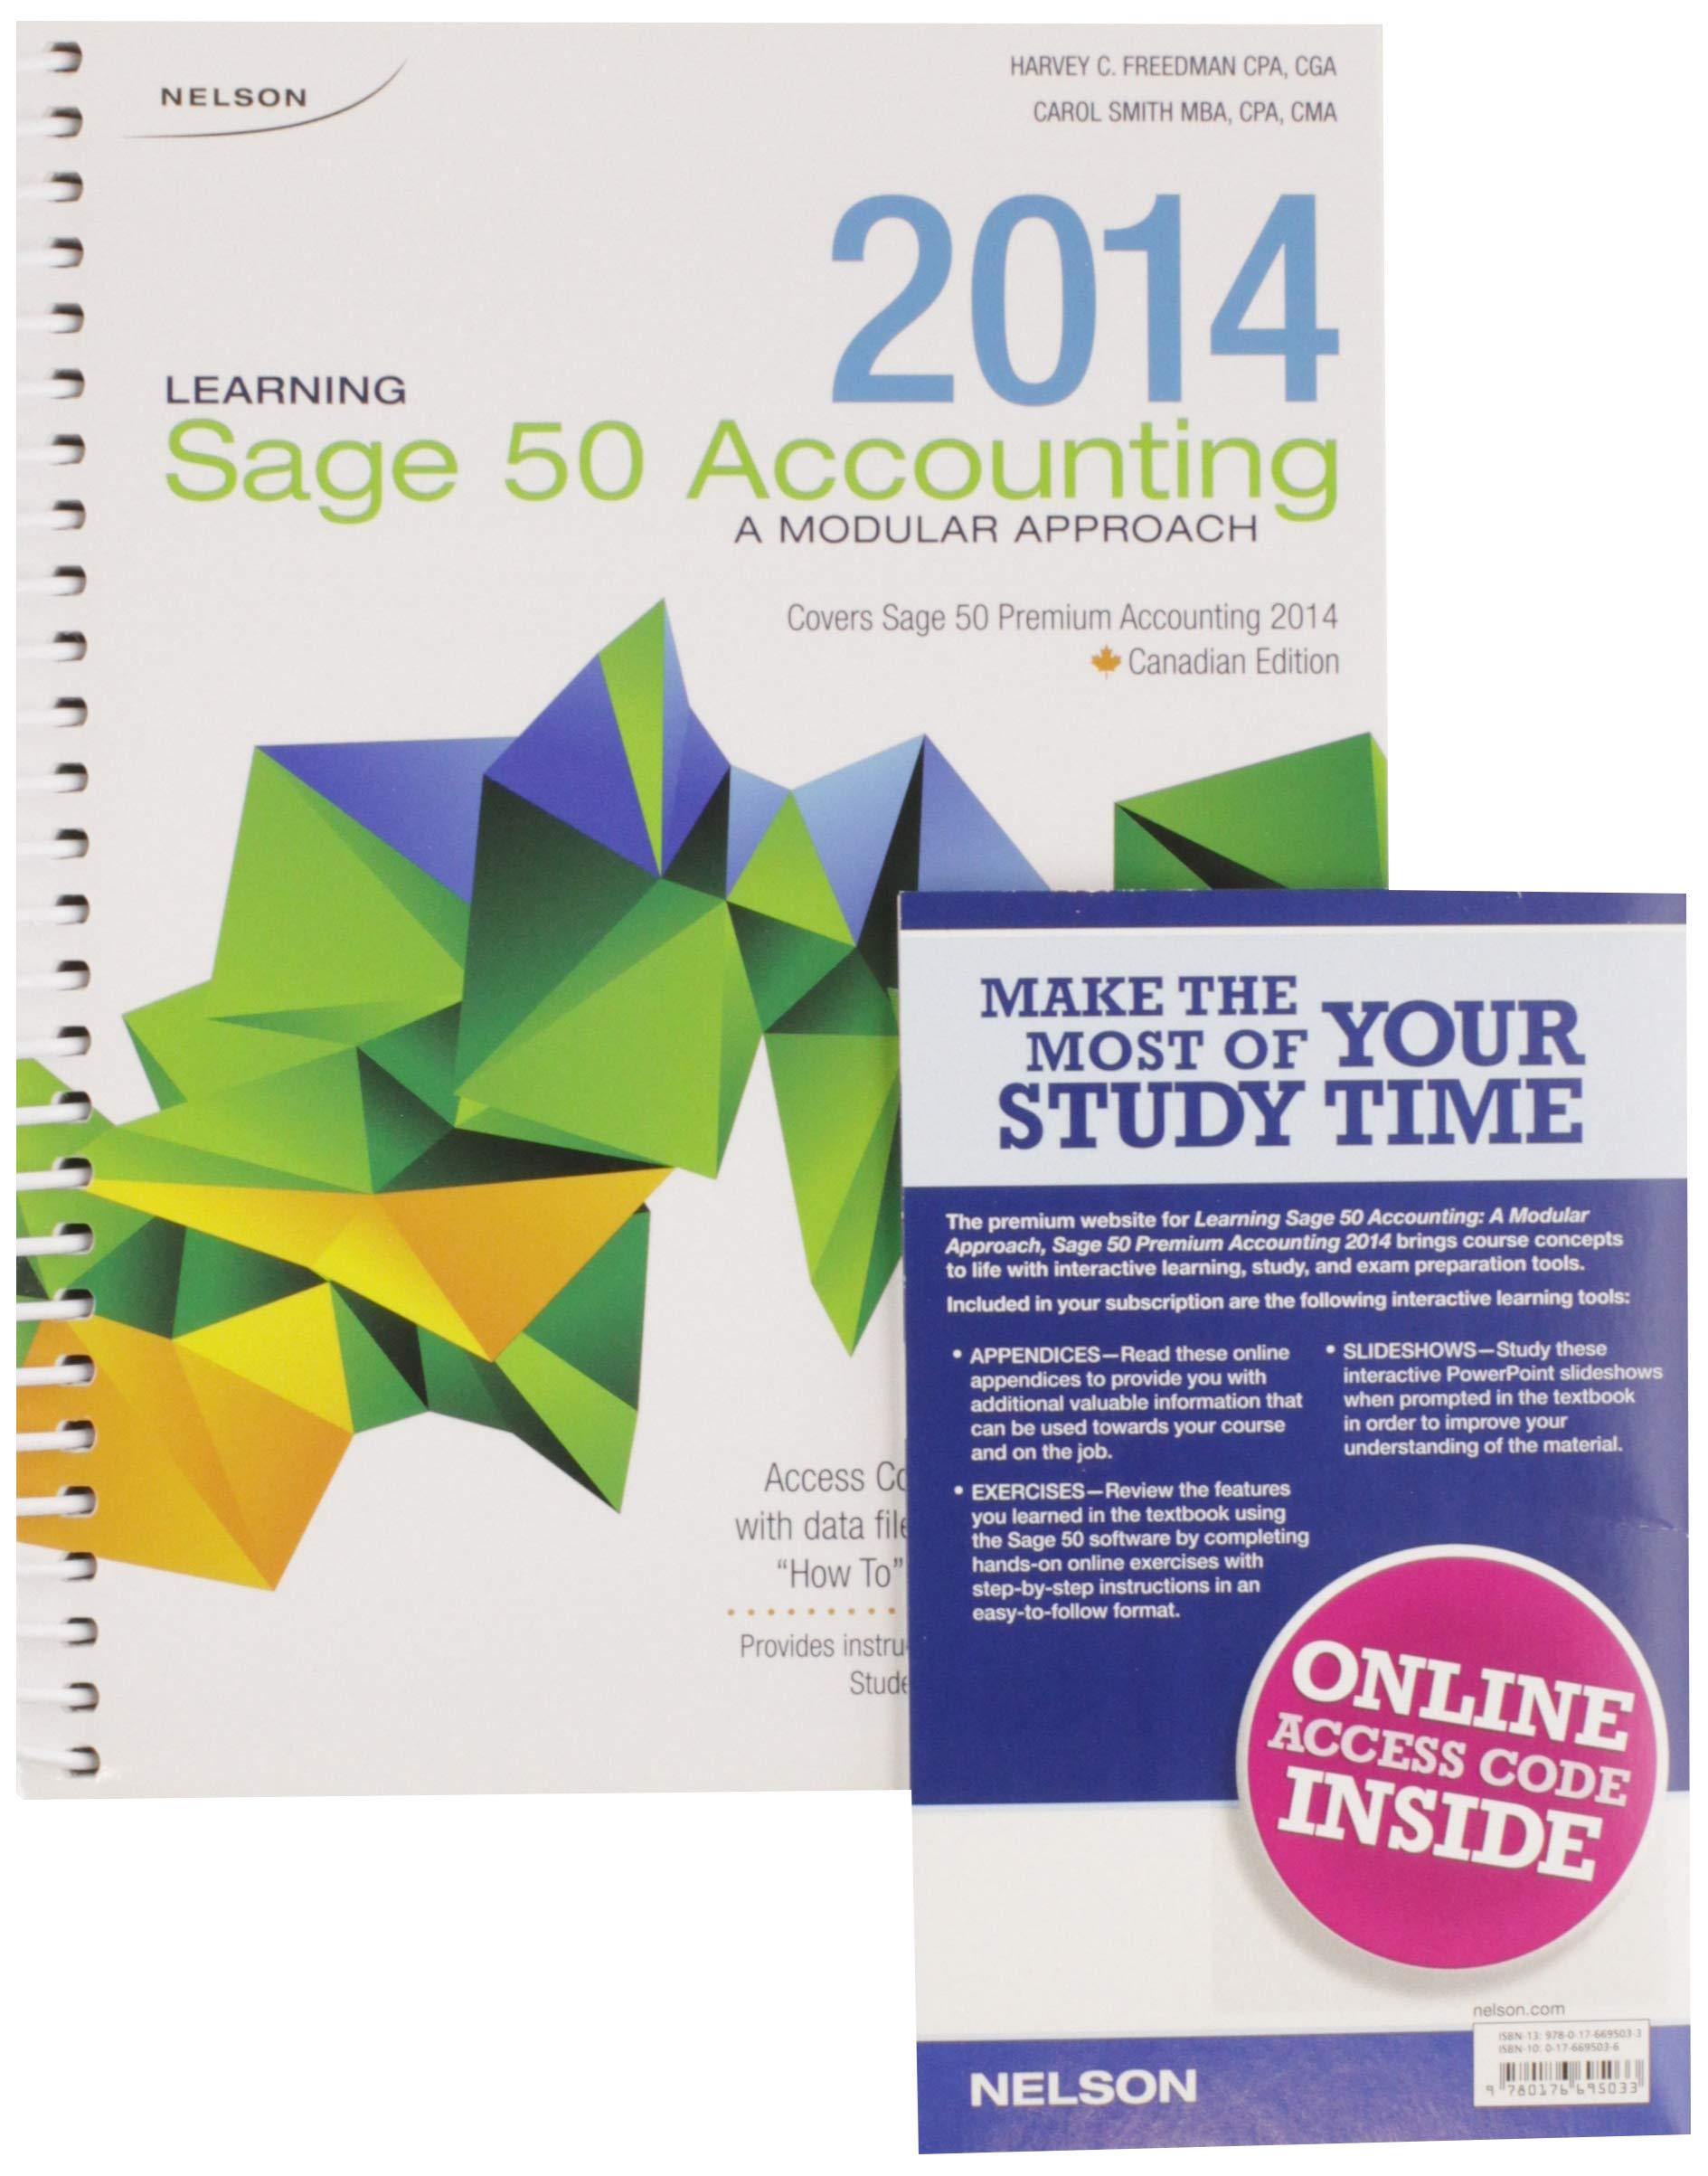 Learning Sage 50 Accounting 2014 A Modular Approach